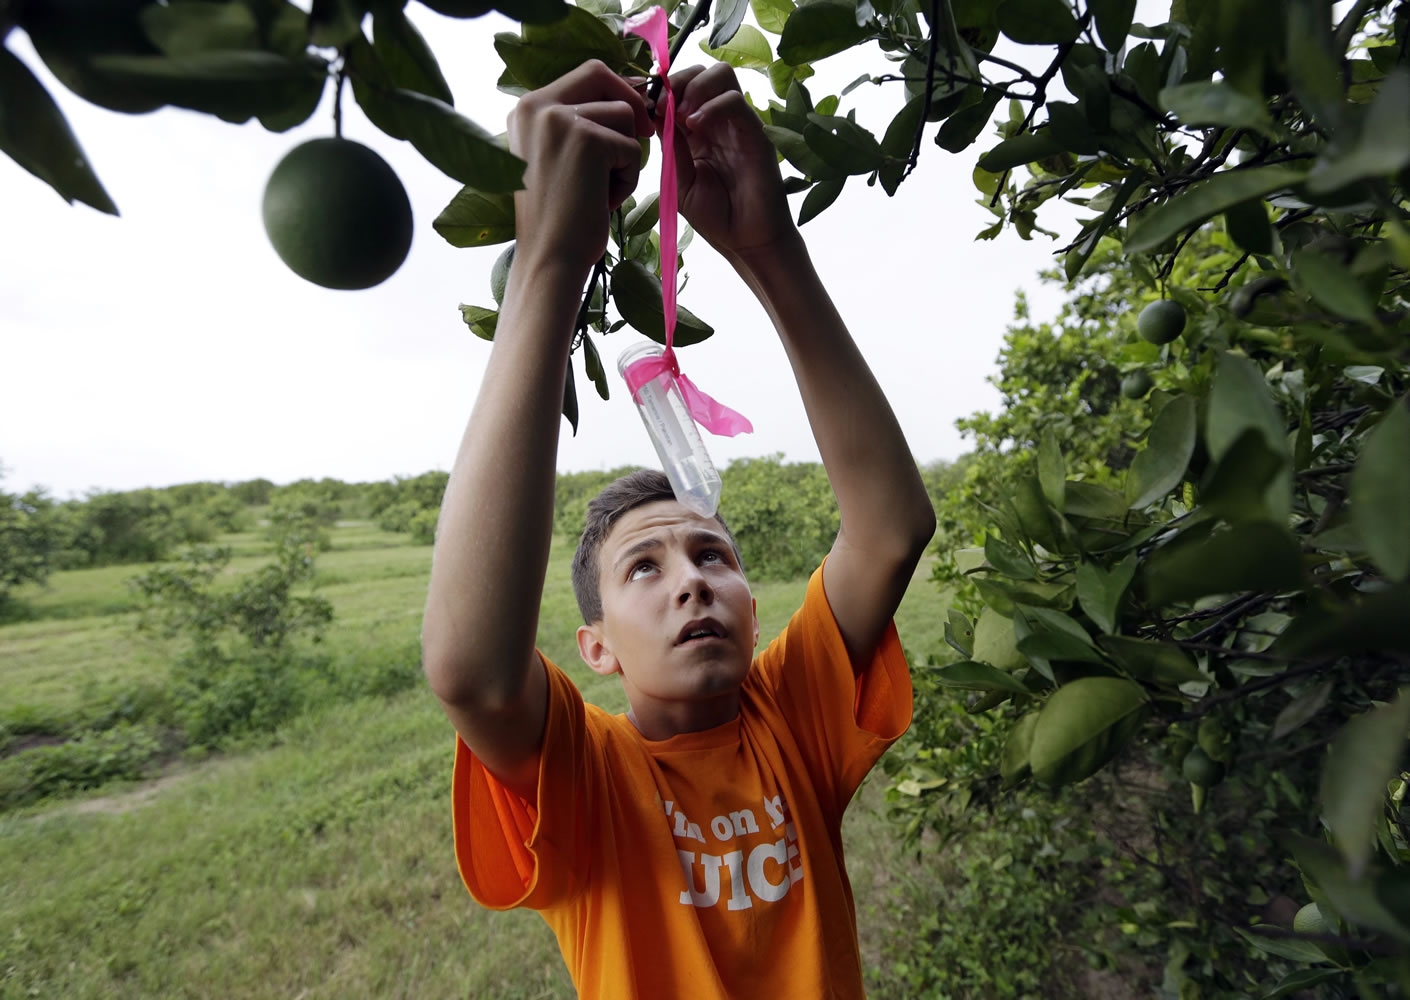 Nick Howell, 13, a member of the McLean family who owns Uncle Matt's organic orange juice company, places a vial containing the tamarixia wasp to release in their orange groves July 25 in hopes of combating the citrus greening disease, in Clermont, Fla.